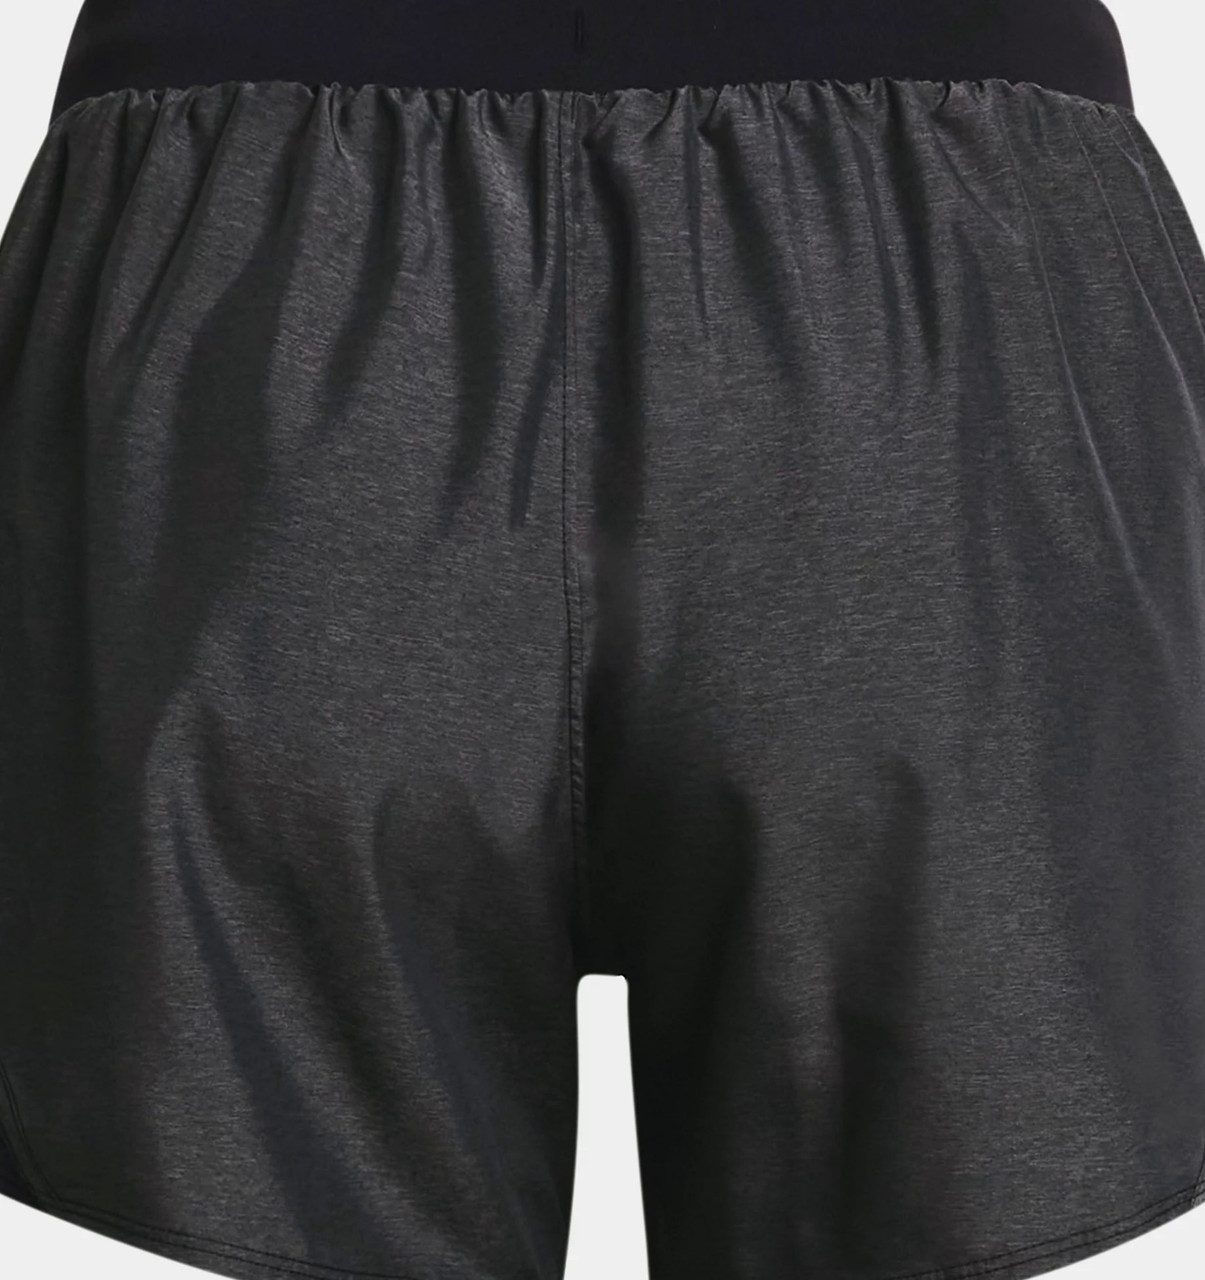 Under Armour, Fly By 2 Shorts Womens